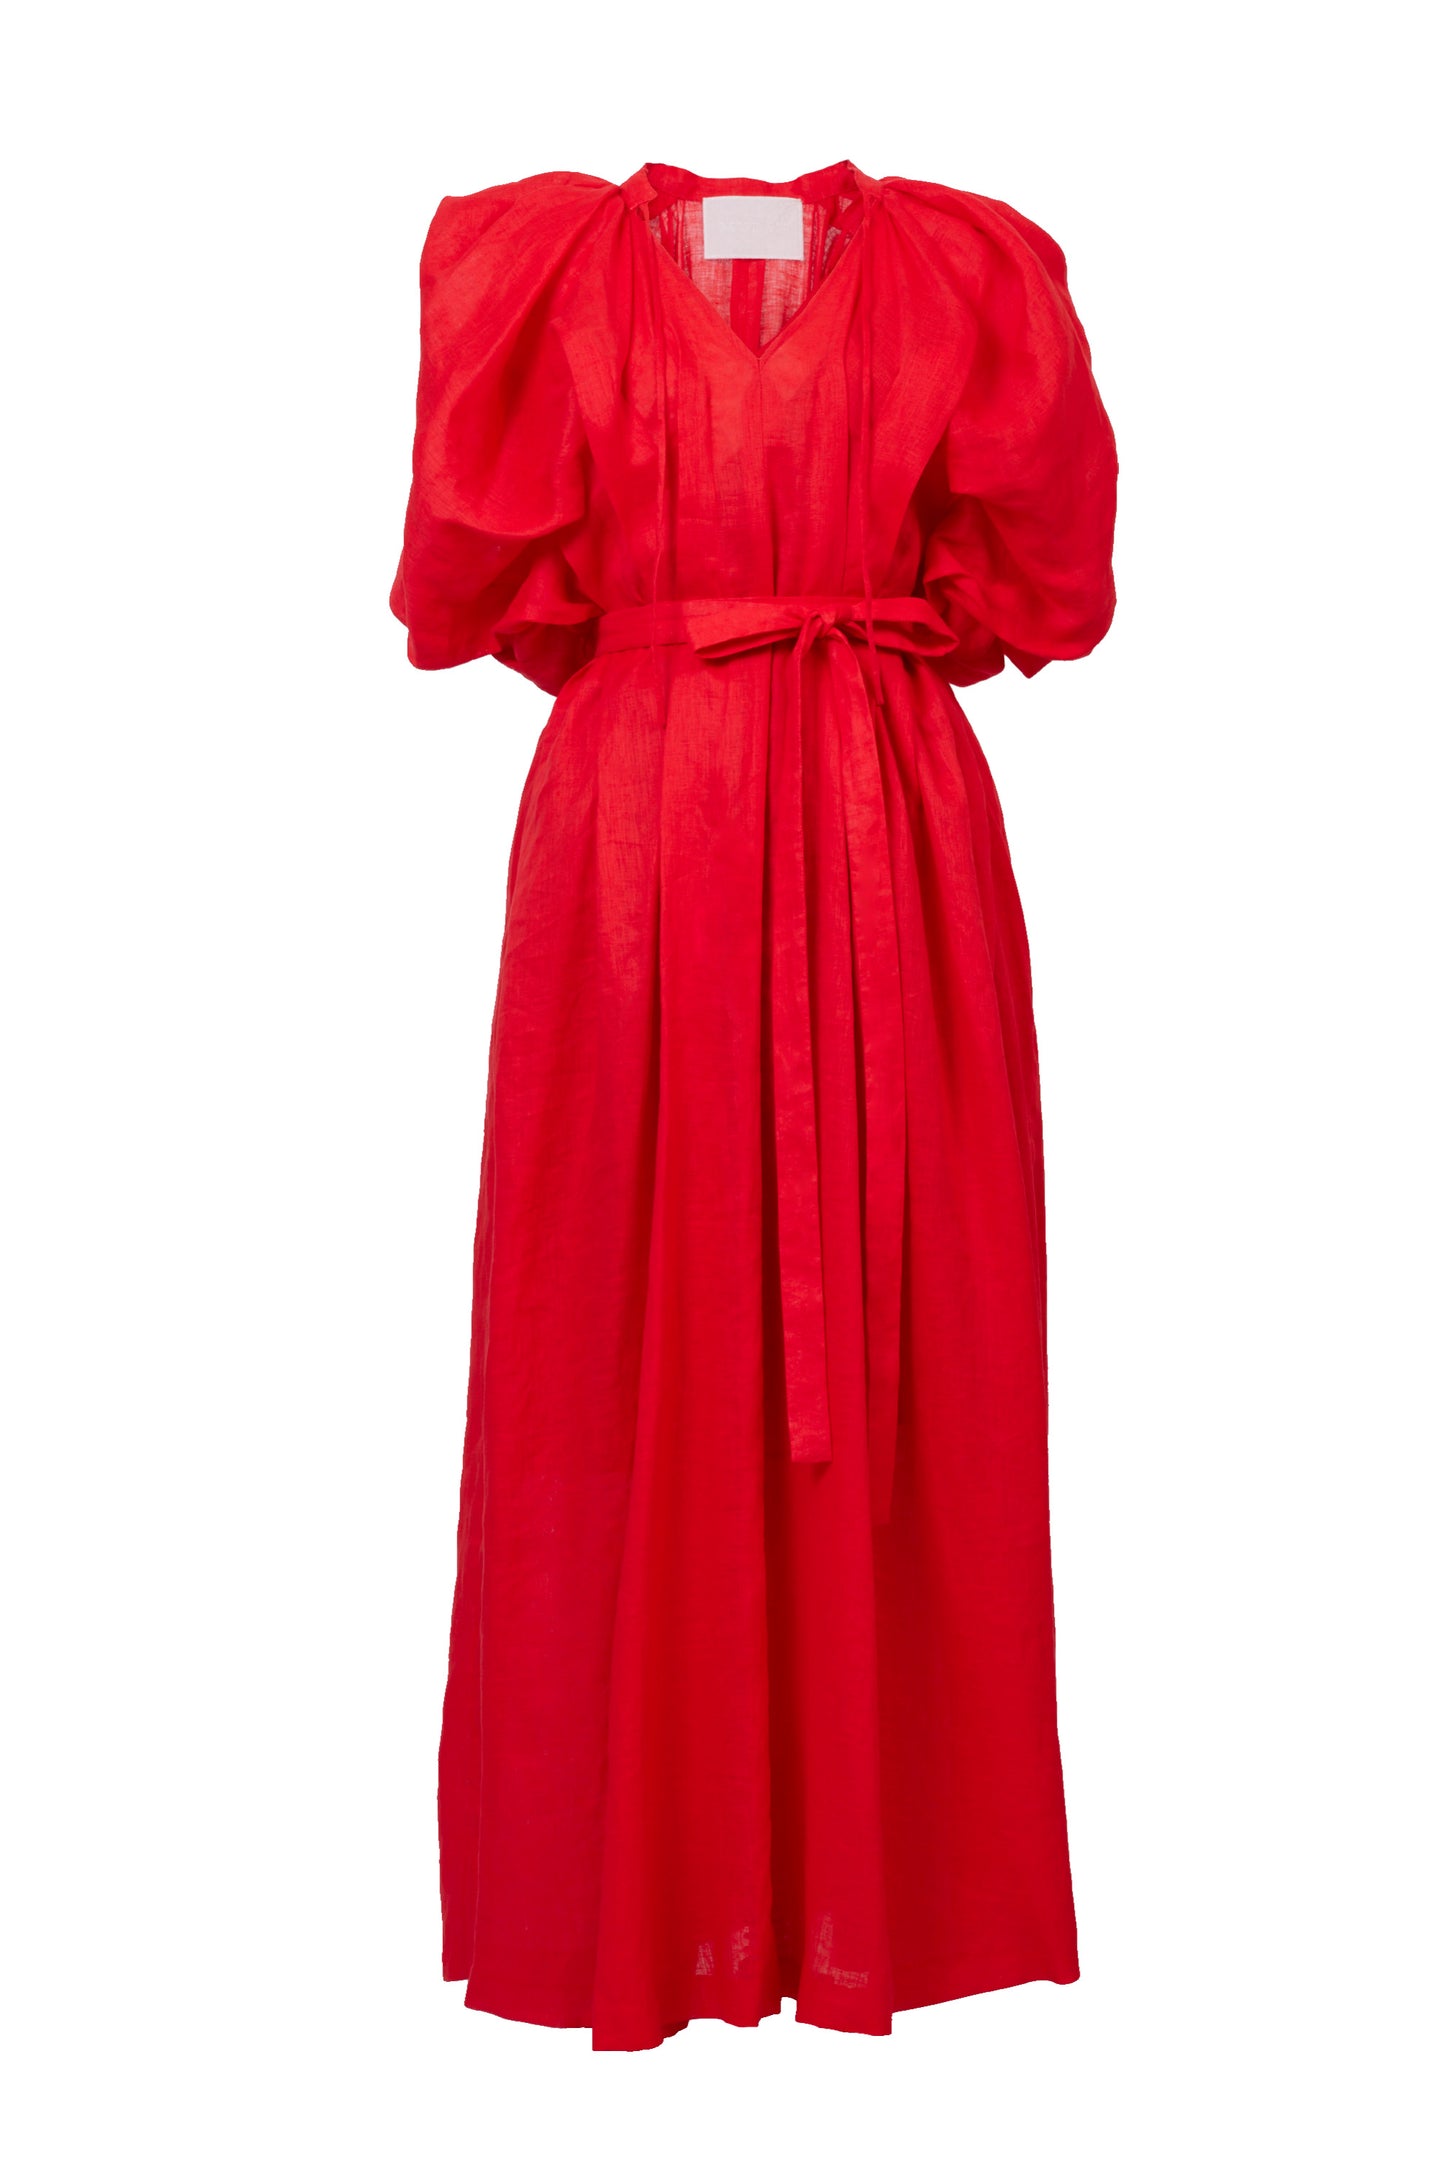 Volume Sleeve Maxi Dress | Coral Red